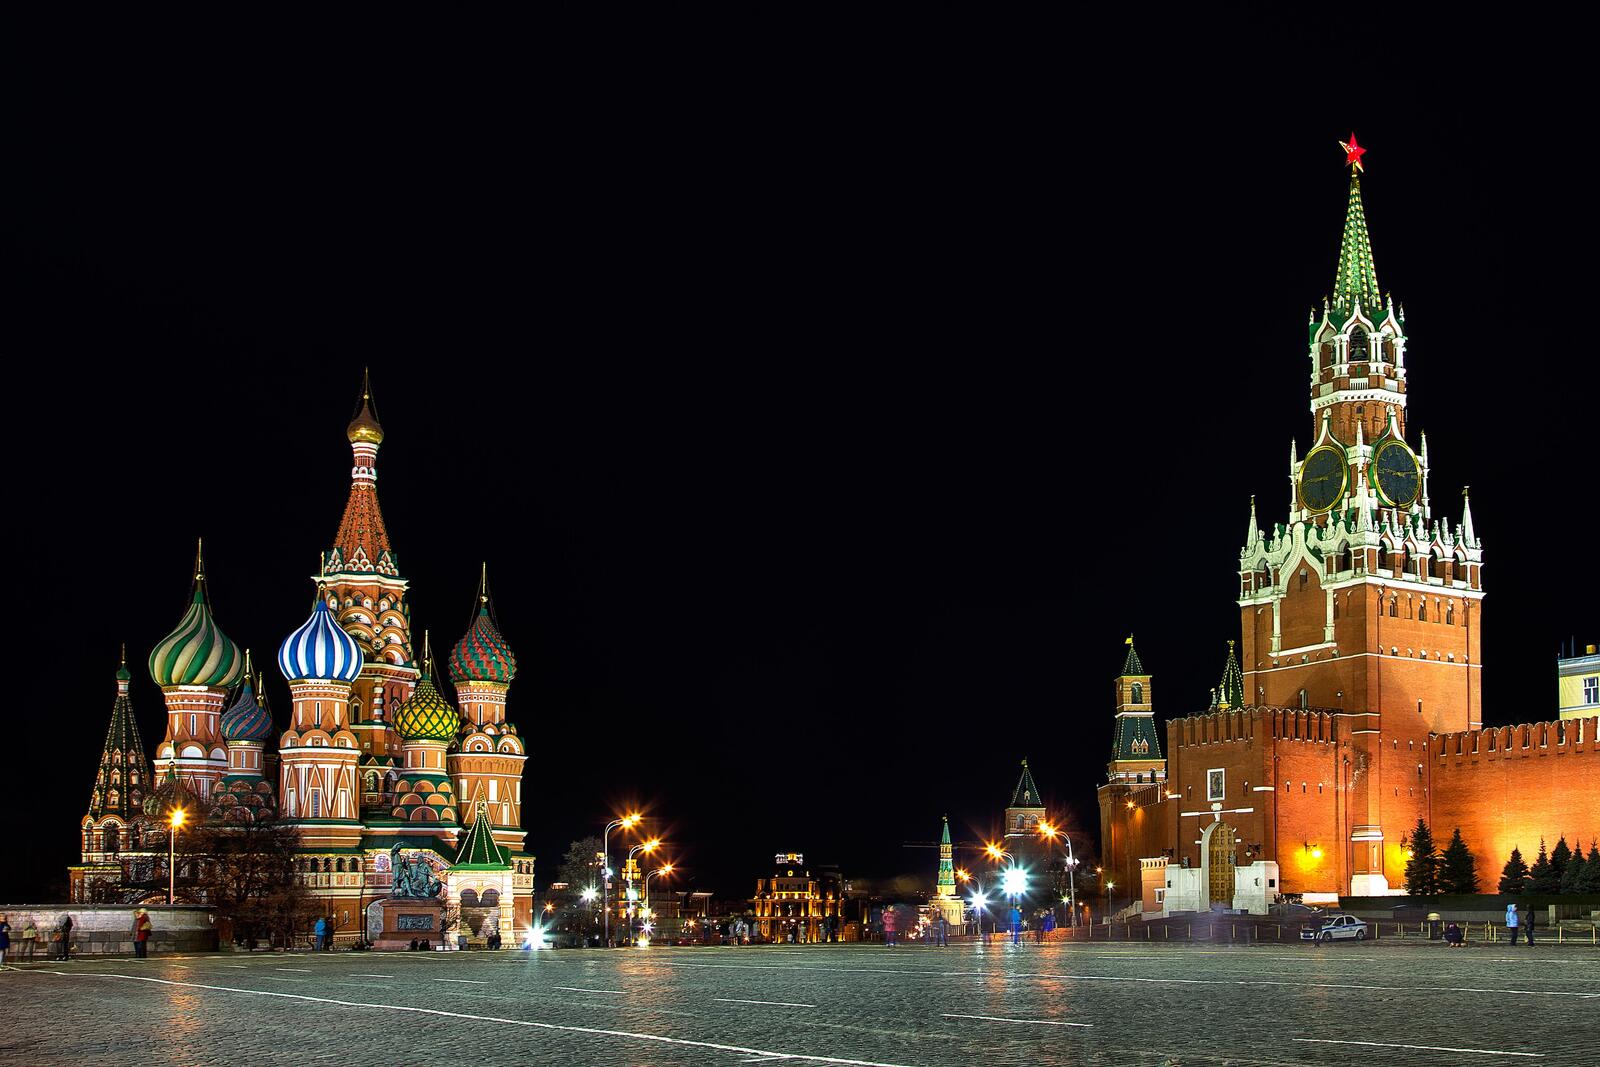 Wallpapers Moscow Kremlin St Basil s Cathedral Russia on the desktop